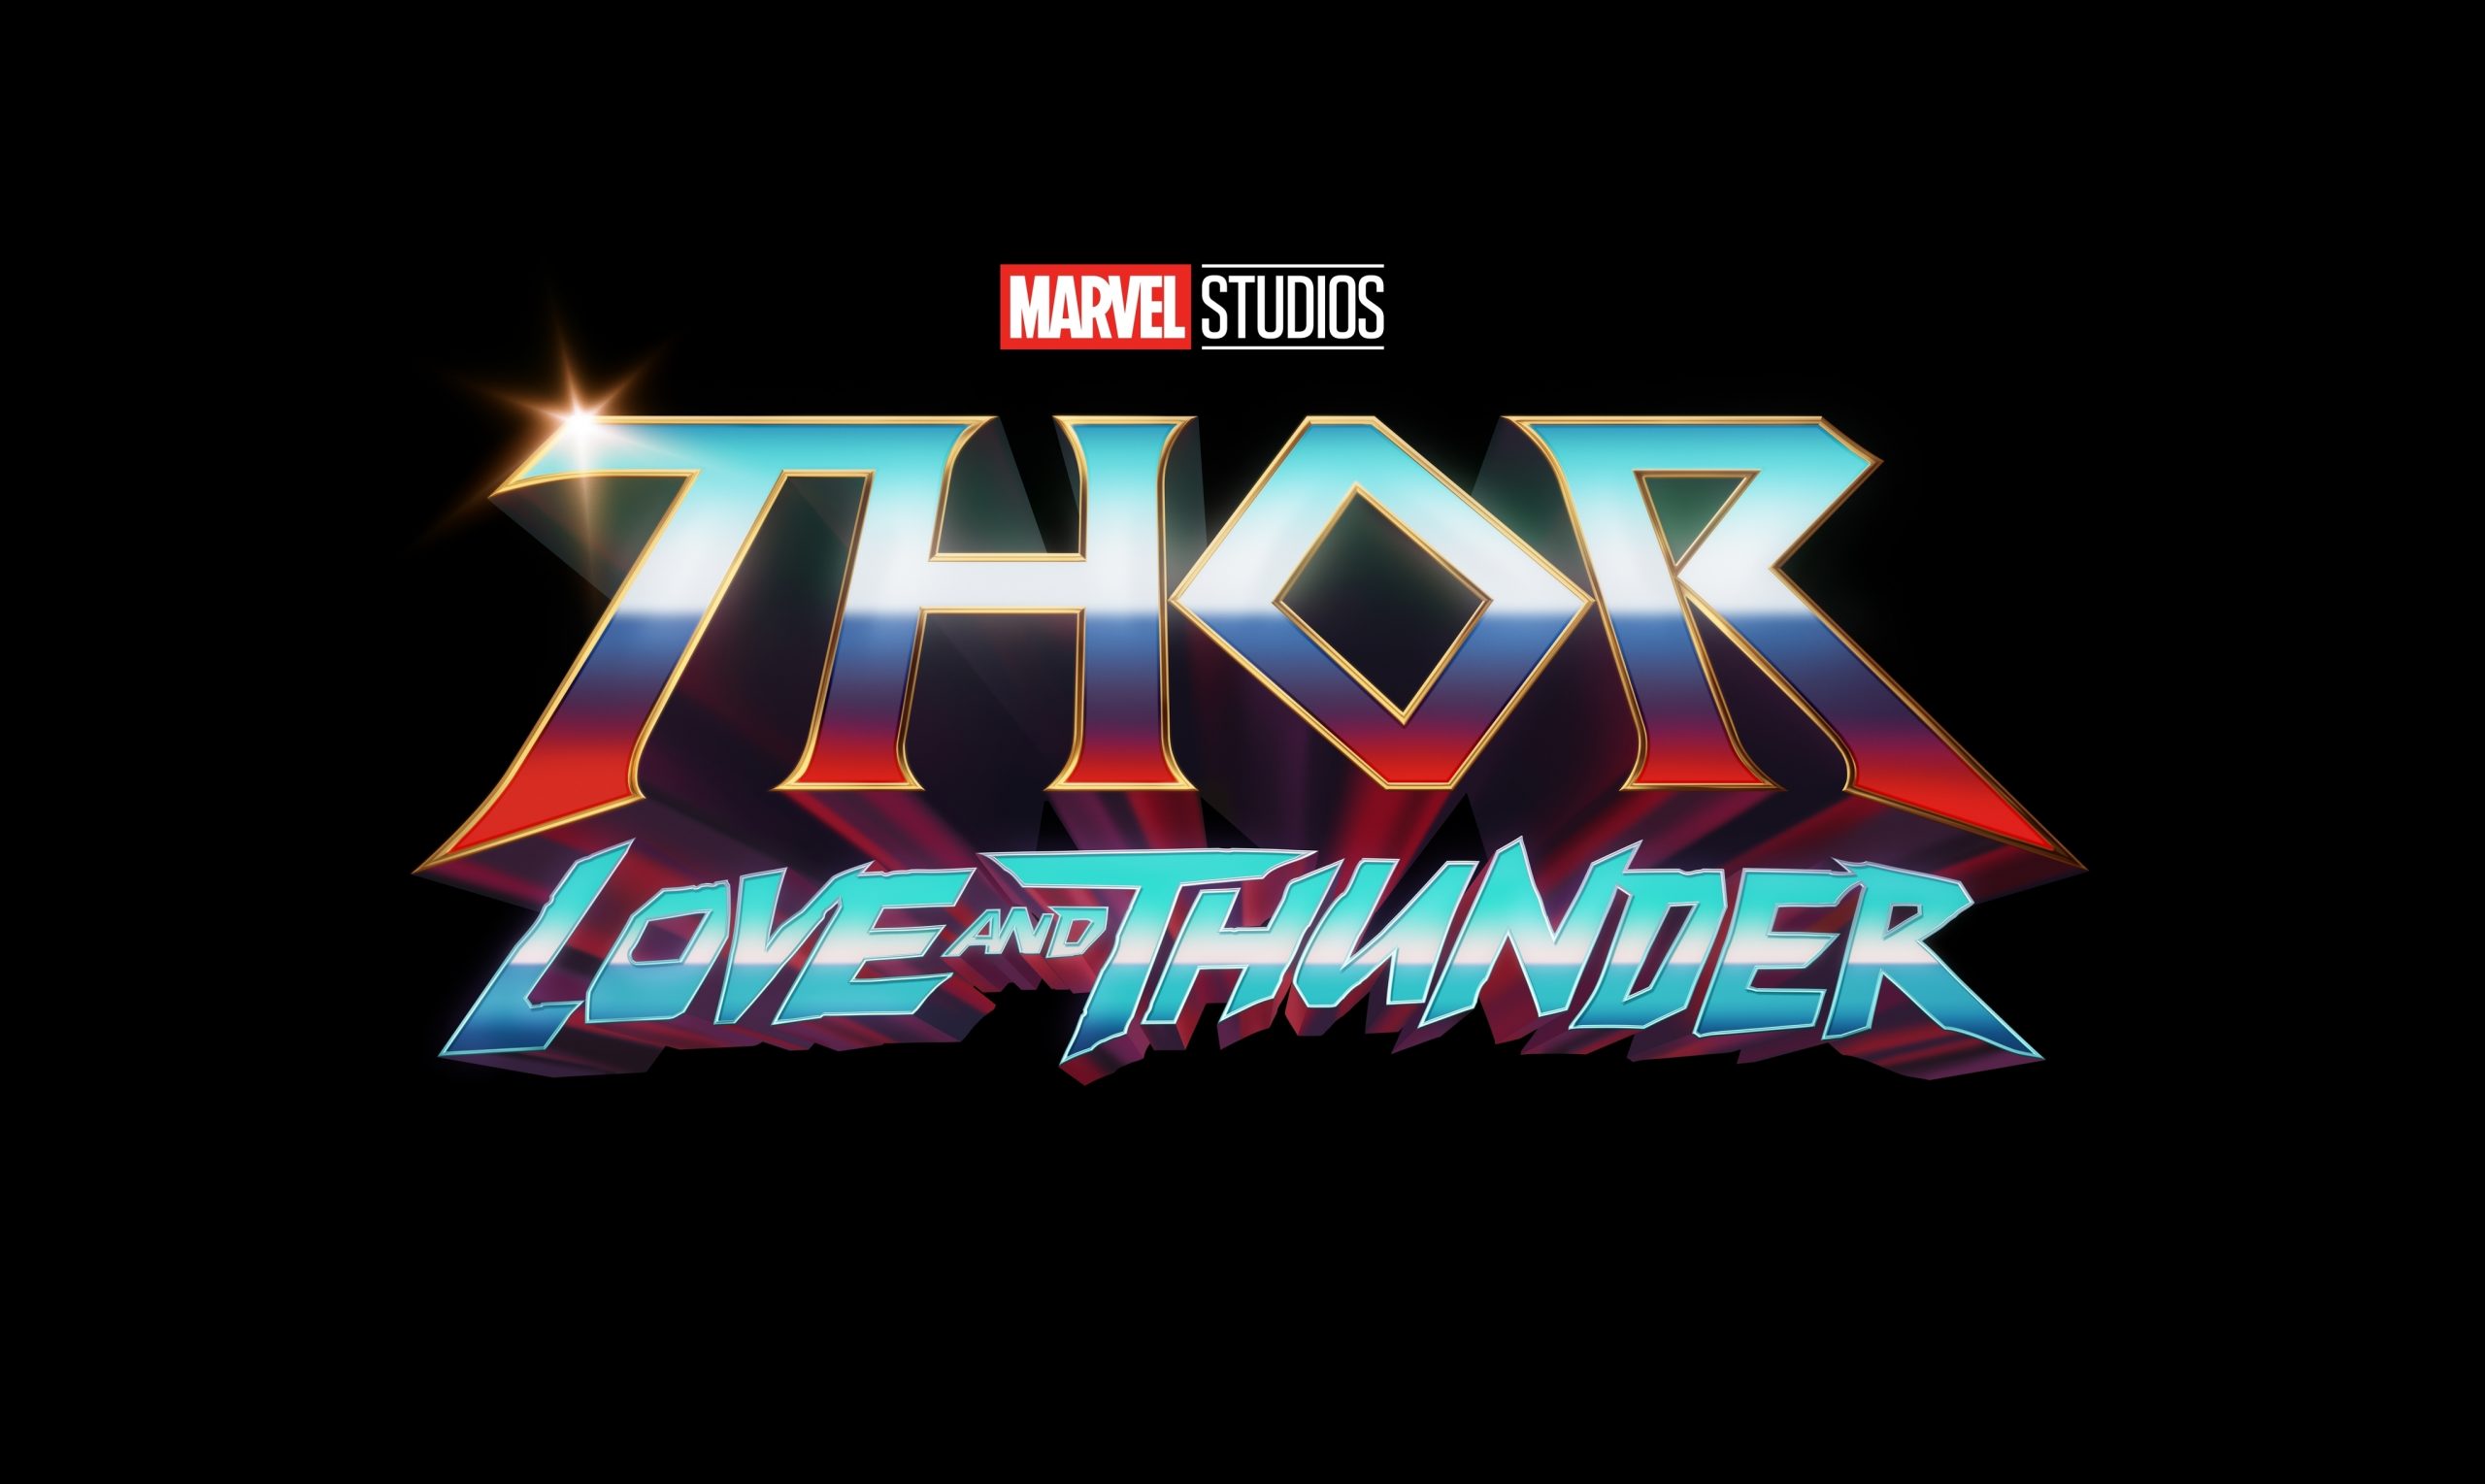 Chris Hemsworth Opens Up About Mixed 'Thor: Love And Thunder' Reviews